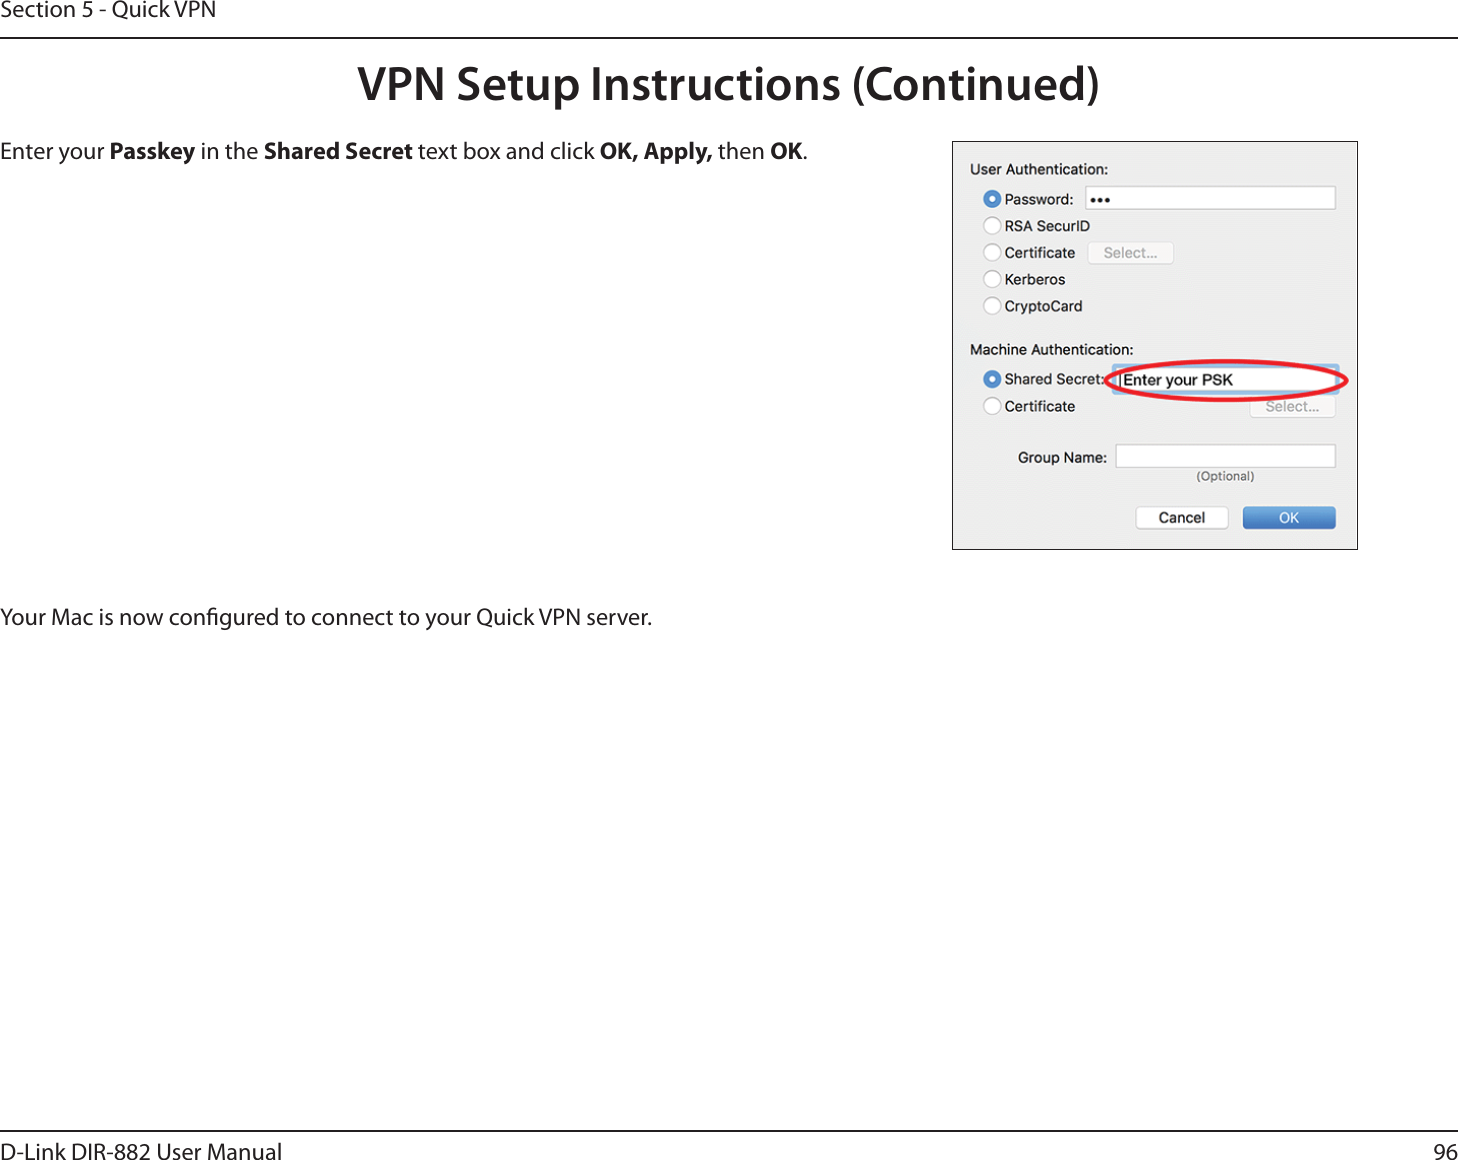 96D-Link DIR-882 User ManualSection 5 - Quick VPNEnter your Passkey in the Shared Secret text box and click 0,&quot;QQMZthen OK.Your Mac is now congured to connect to your Quick VPN server.VPN Setup Instructions (Continued)